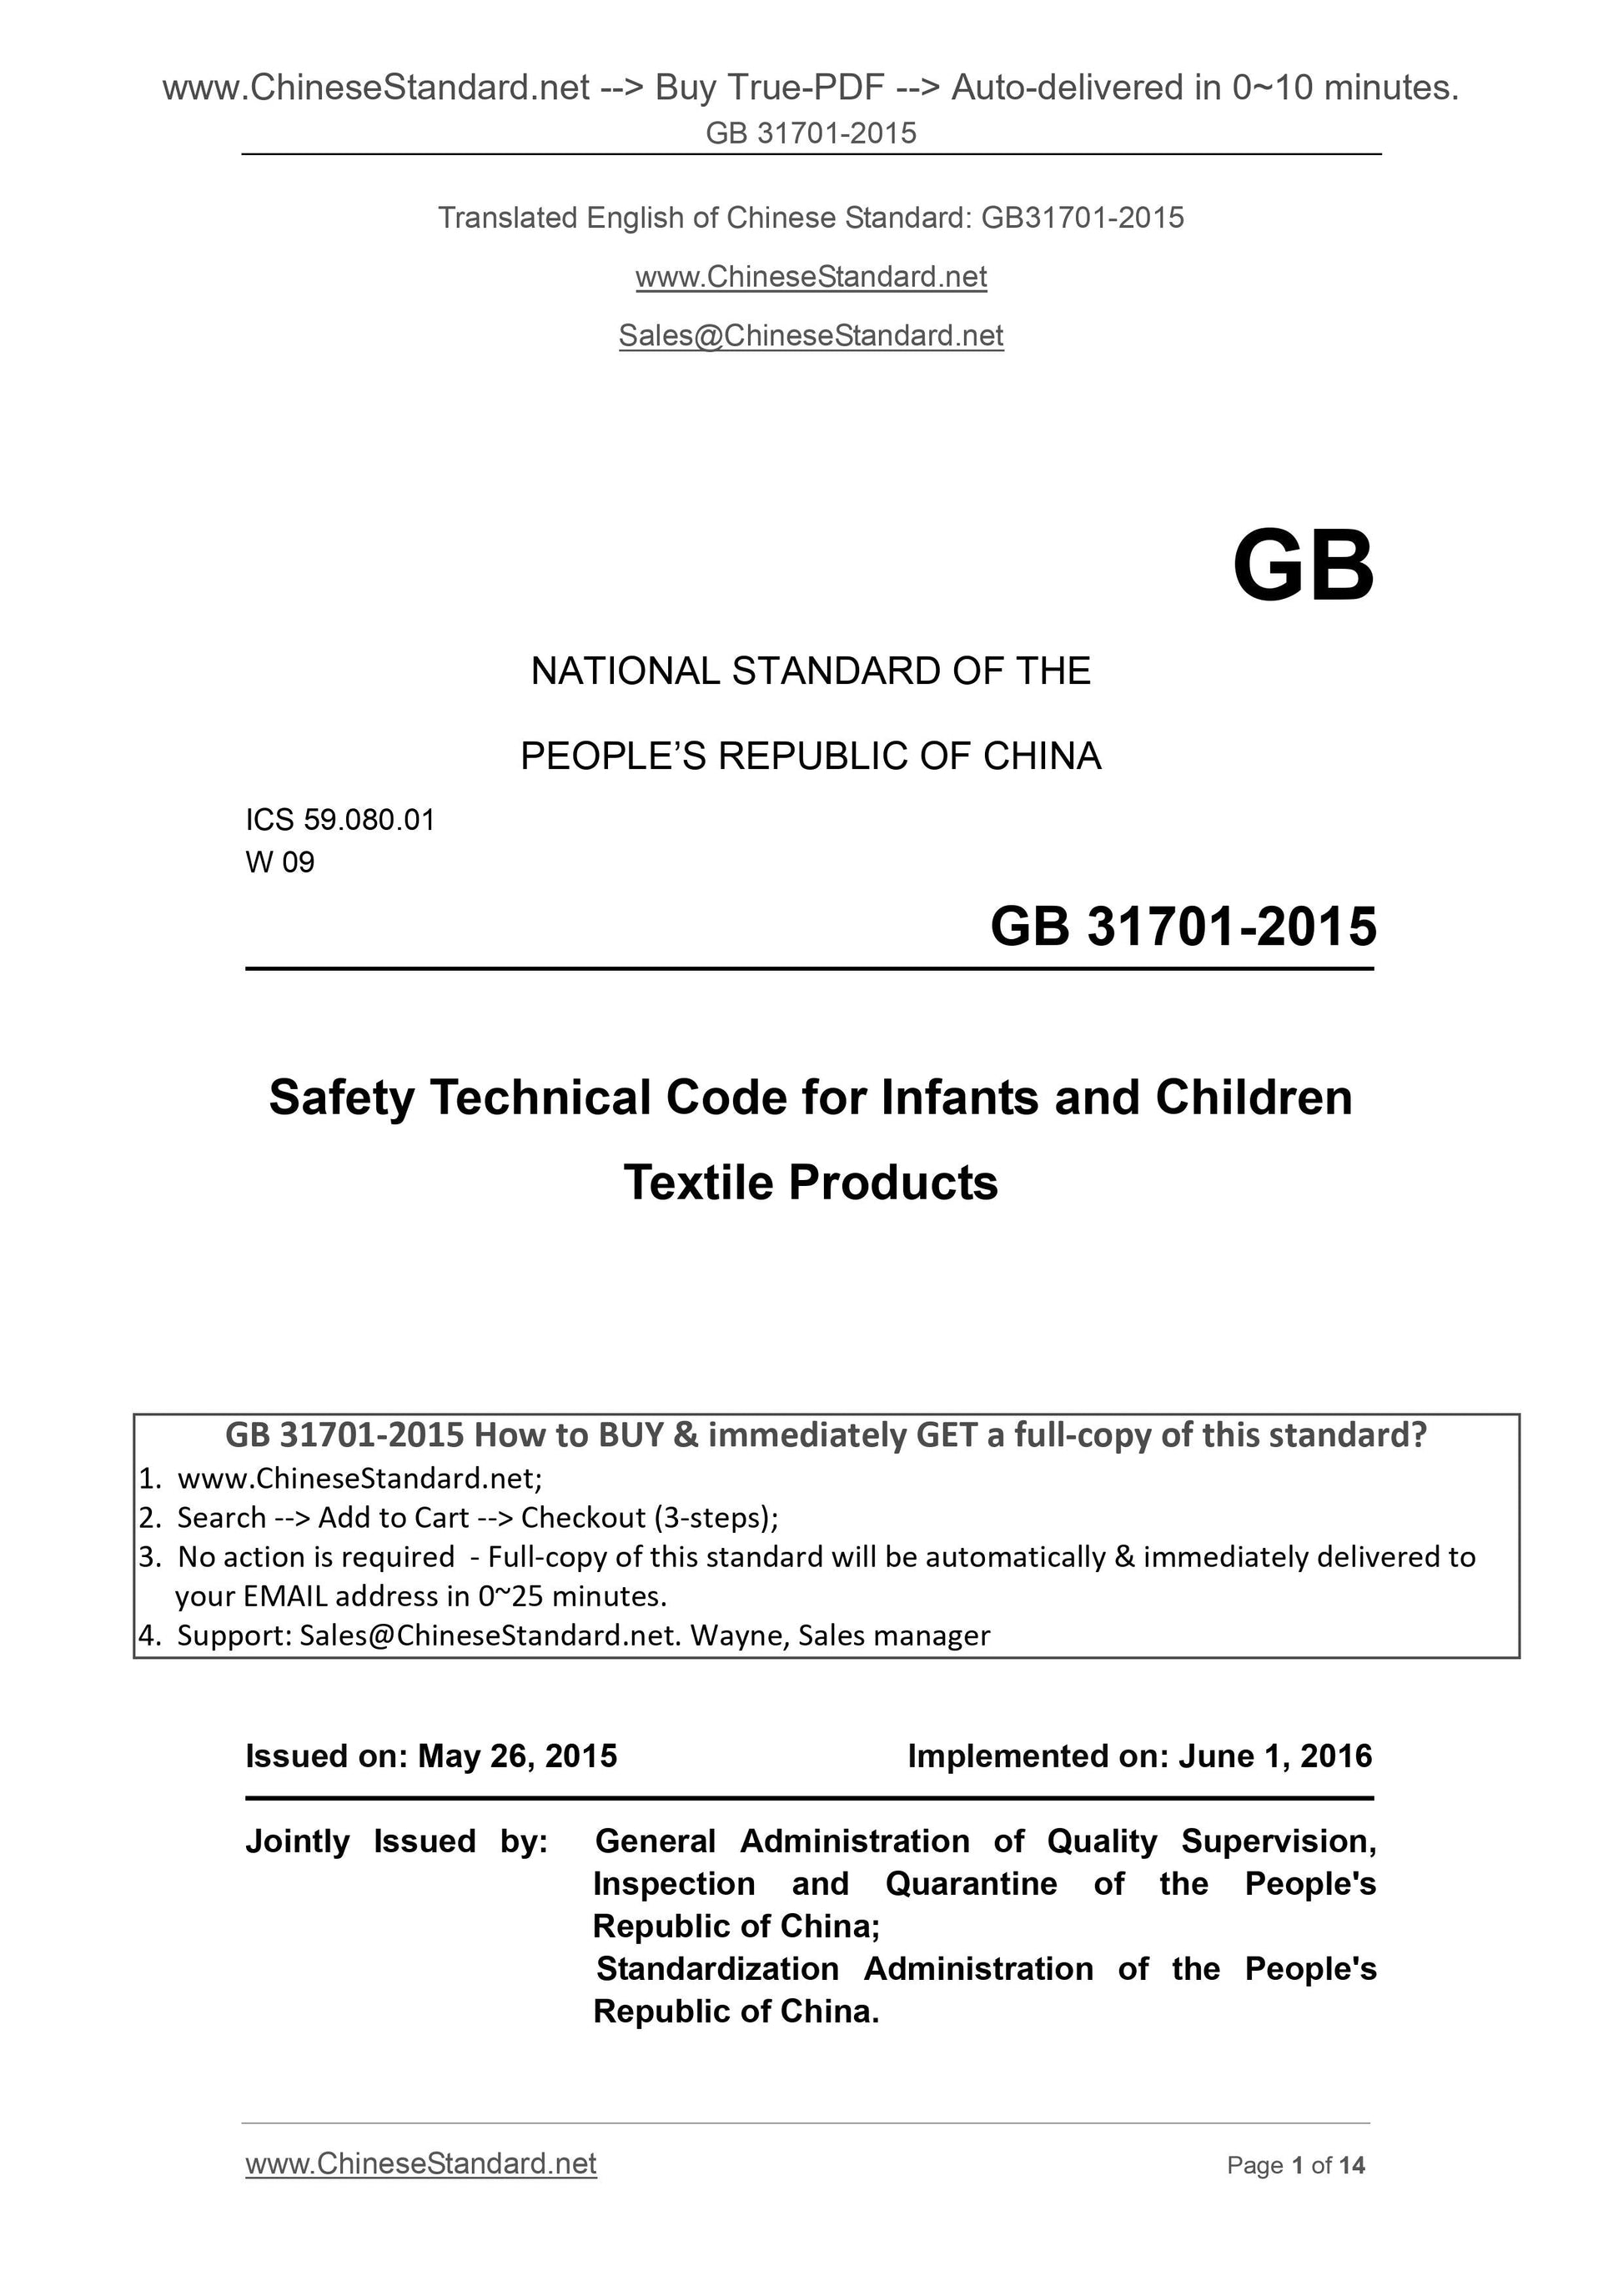 GB 31701-2015 Page 1